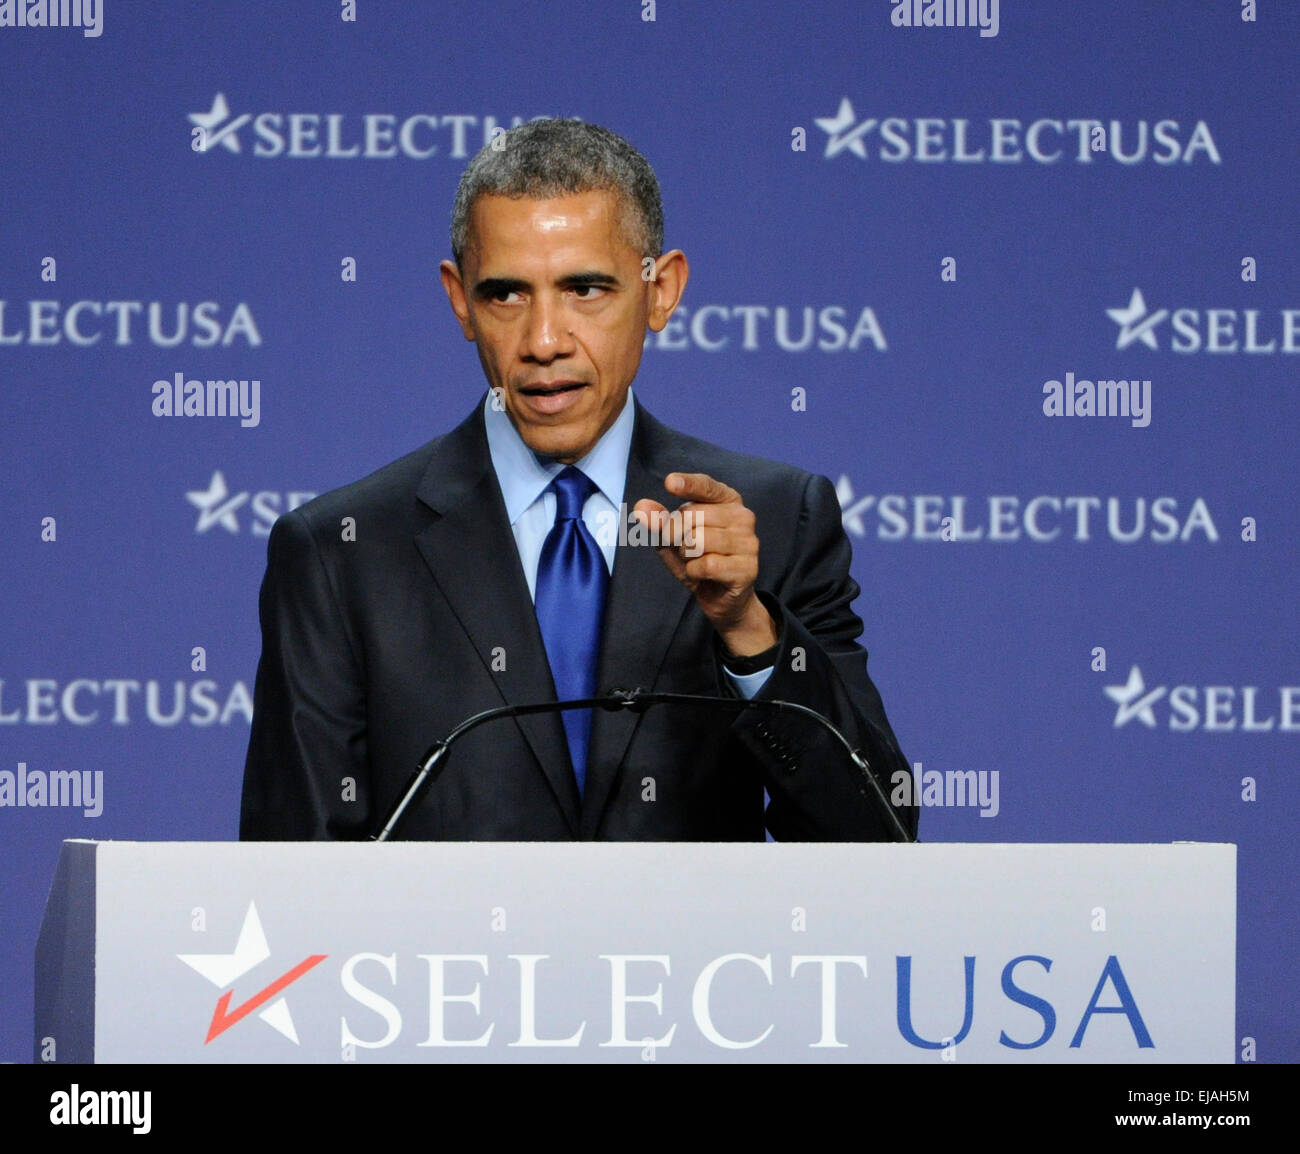 Washington, DC, USA. 23rd Mar, 2015. U.S. President Barack Obama speaks during the 2015 SelectUSA Investment Summit in Washington, DC, capital of the United States, March 23, 2015. U.S. President Barack Obama on Monday announced a series of new measures to lure more foreign investment and bolster economic recovery. Credit:  Bao Dandan/Xinhua/Alamy Live News Stock Photo